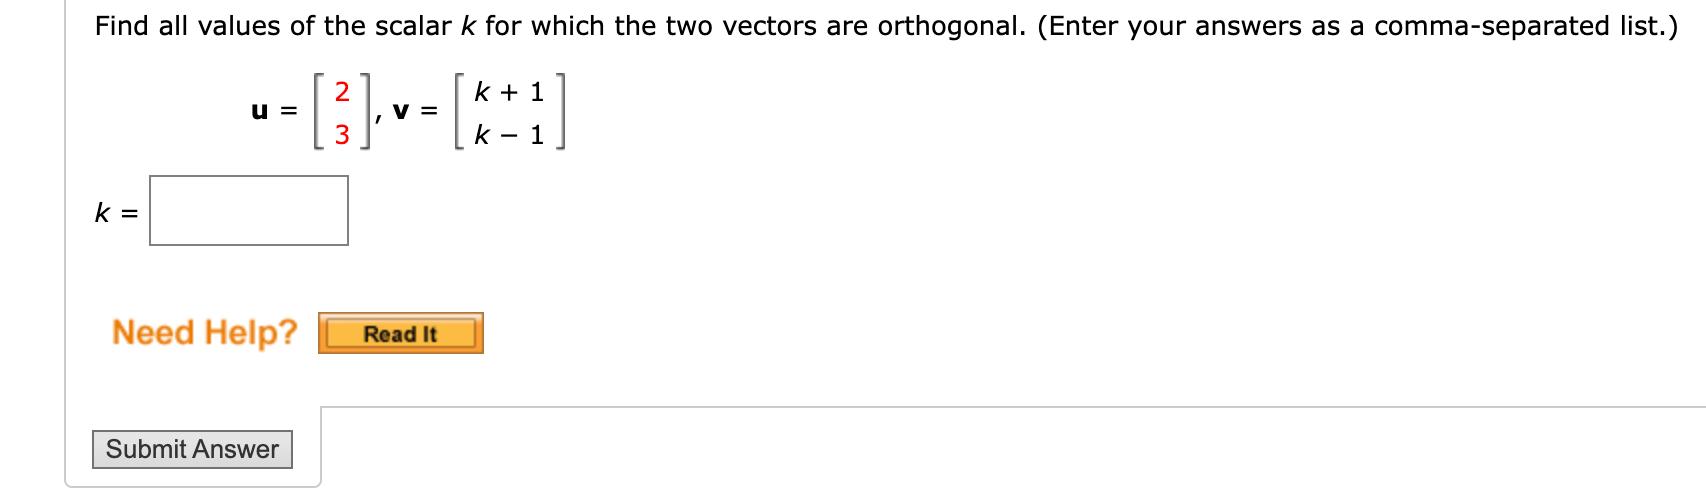 Find all values of the scalar \( k \) for which the two vectors are orthogonal. (Enter your answers as a comma-separated list